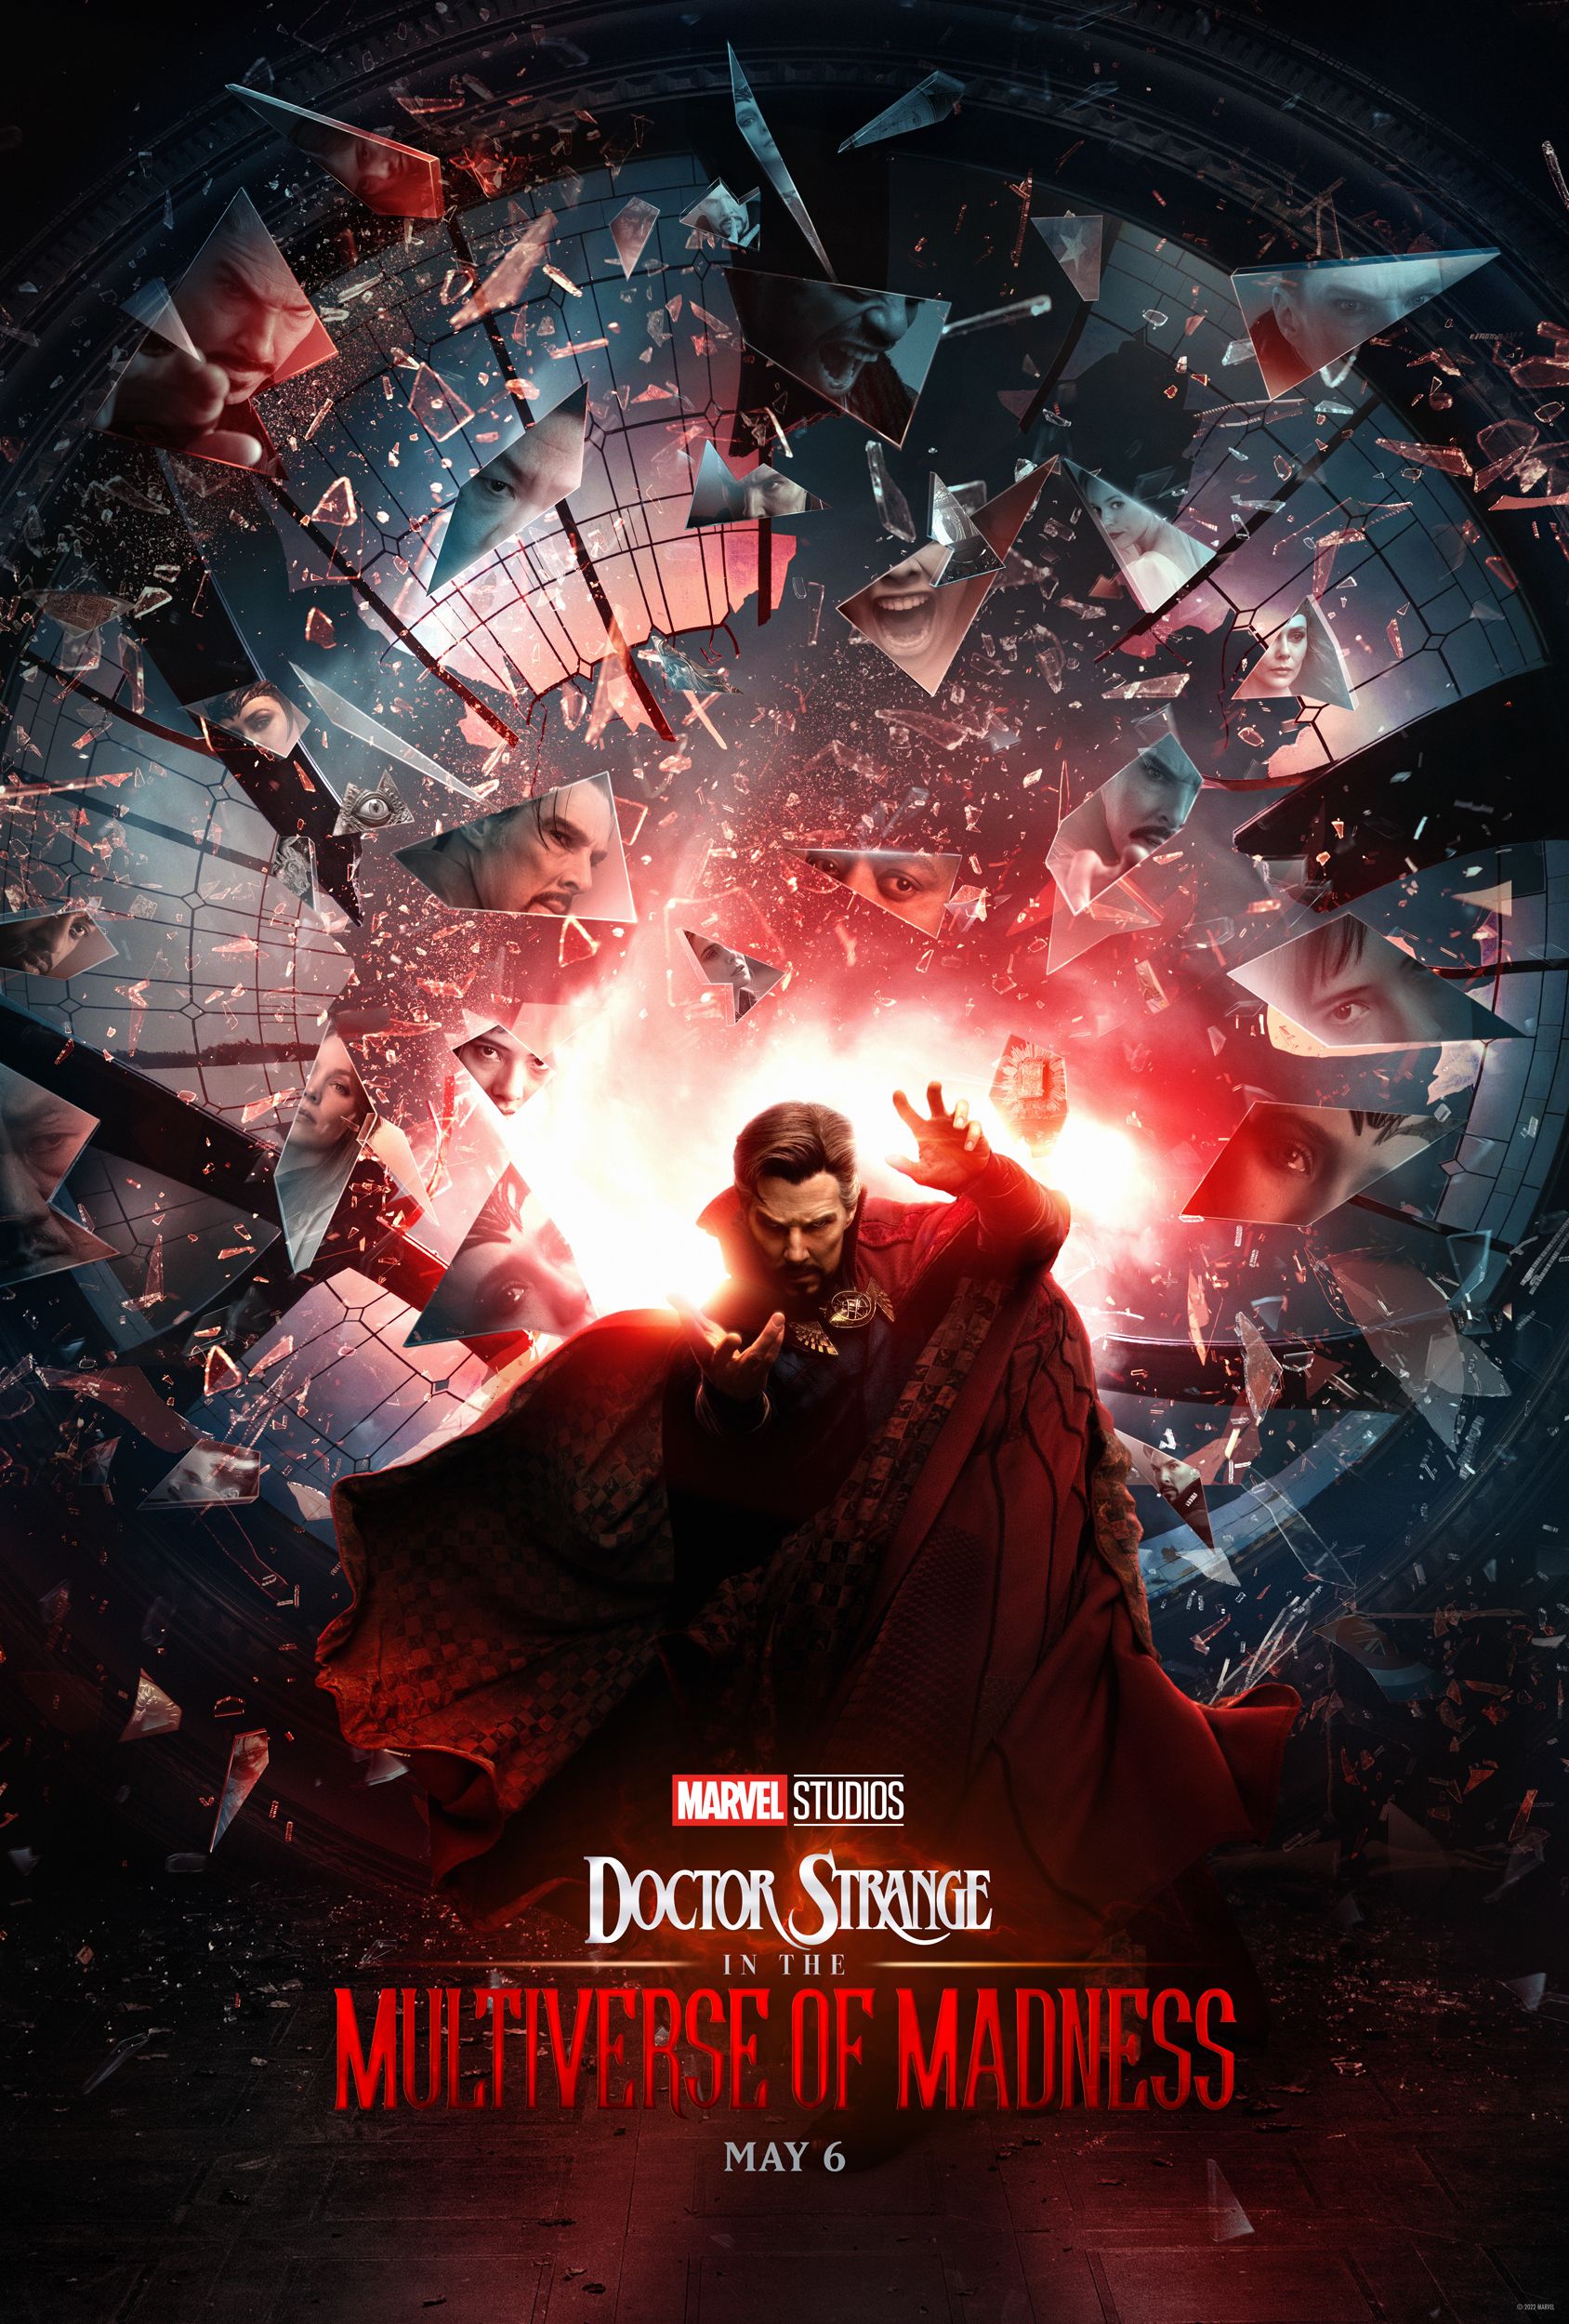 Marvel Studios Doctor Strange in the Multiverse of Madness poster - May 6